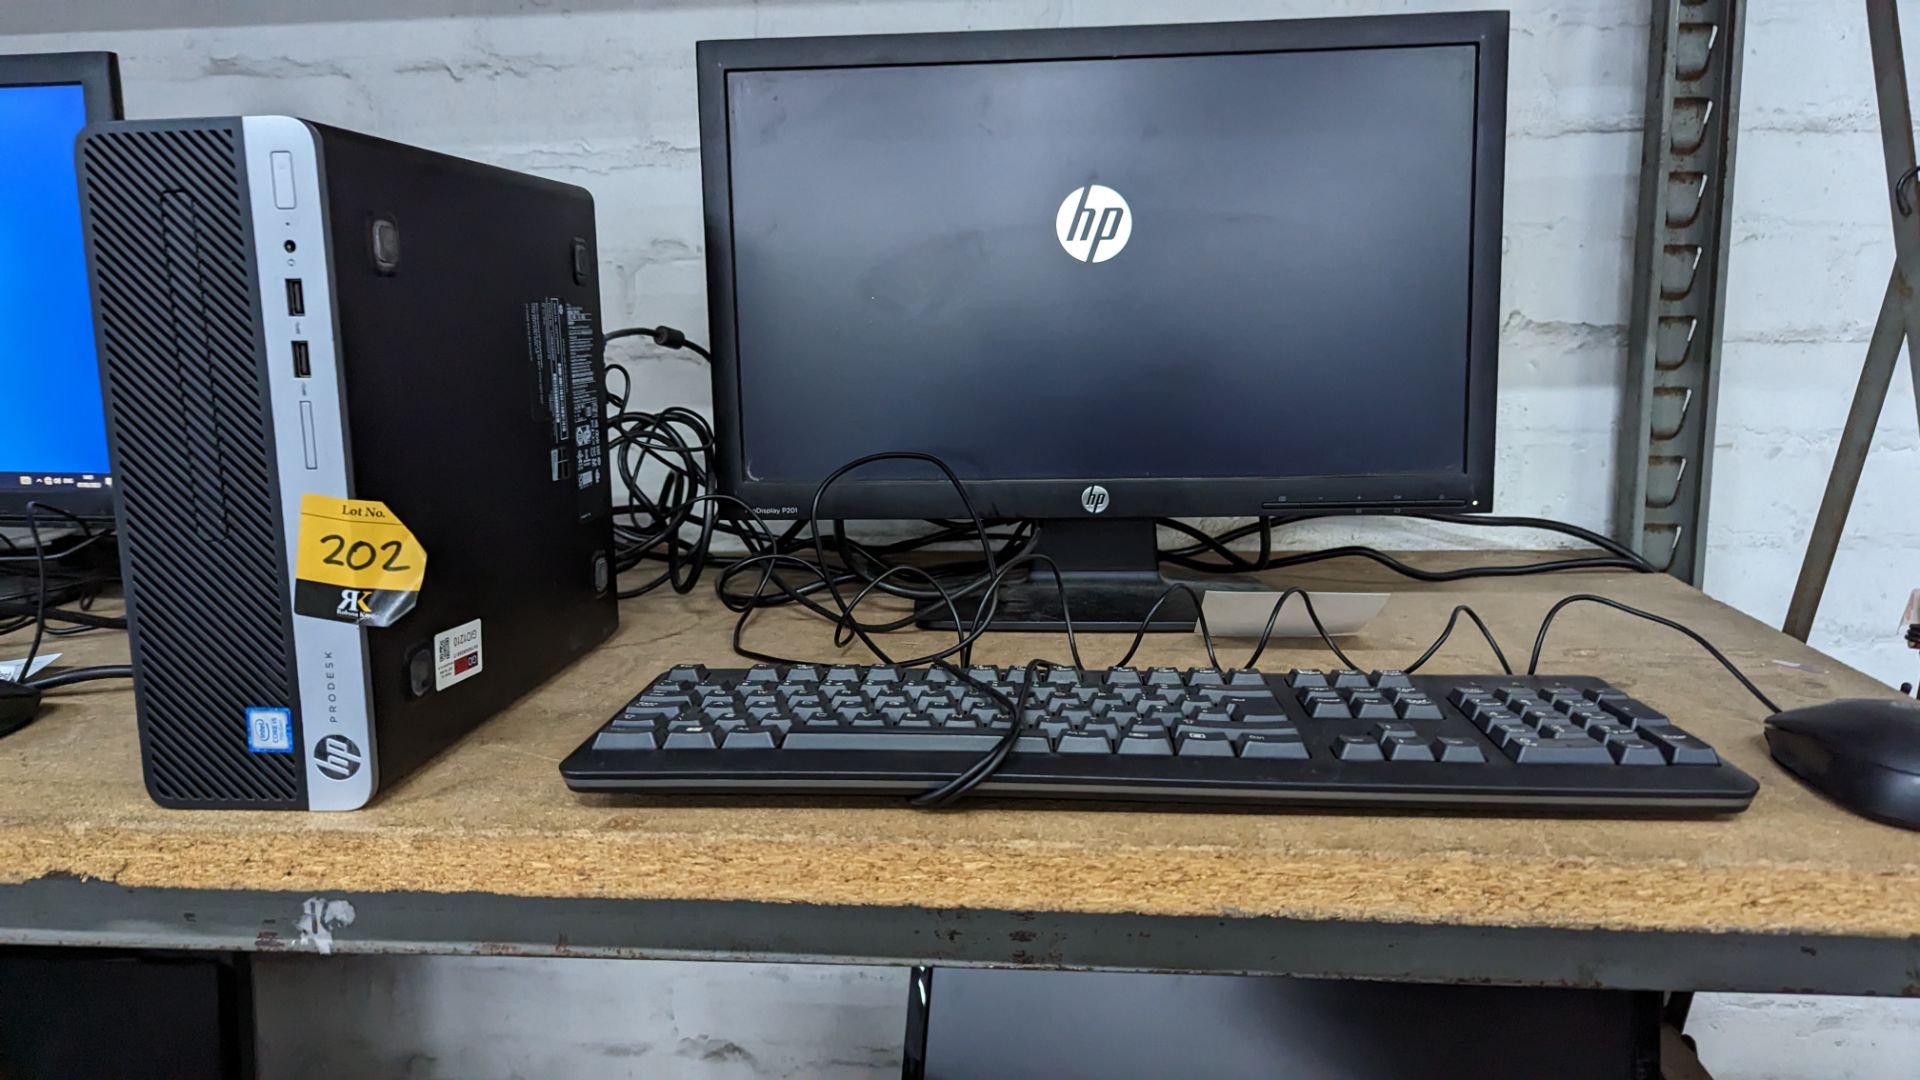 HP ProDesk 400 G4 SFF Business PC with Intel Core i5 7500 CPU, 8GB RAM, 250GB SSD, including keyboar